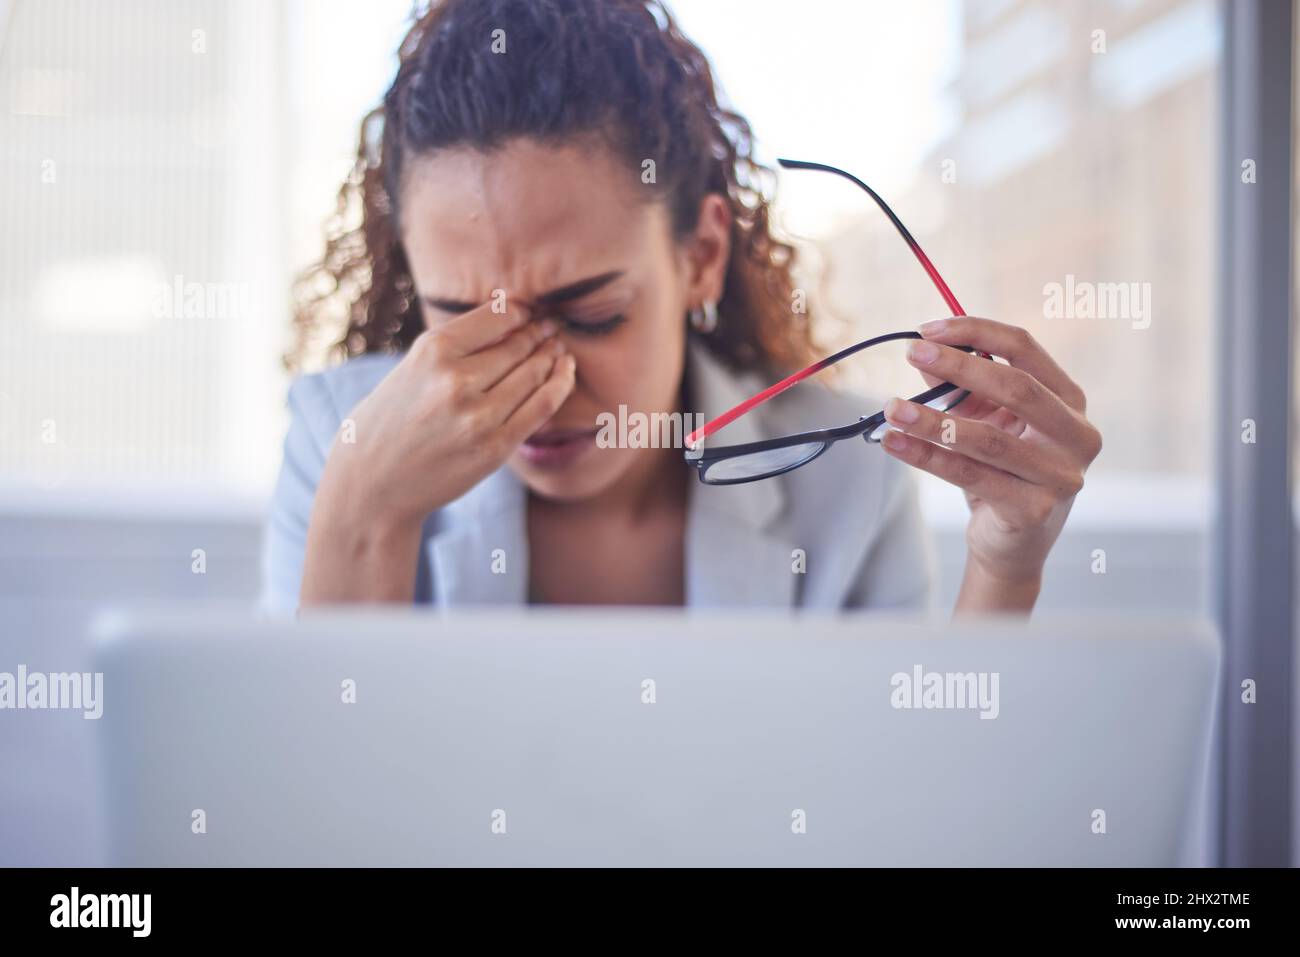 Selective focus on eyeglasses as a woman rubs her eyes due to eye strain Stock Photo